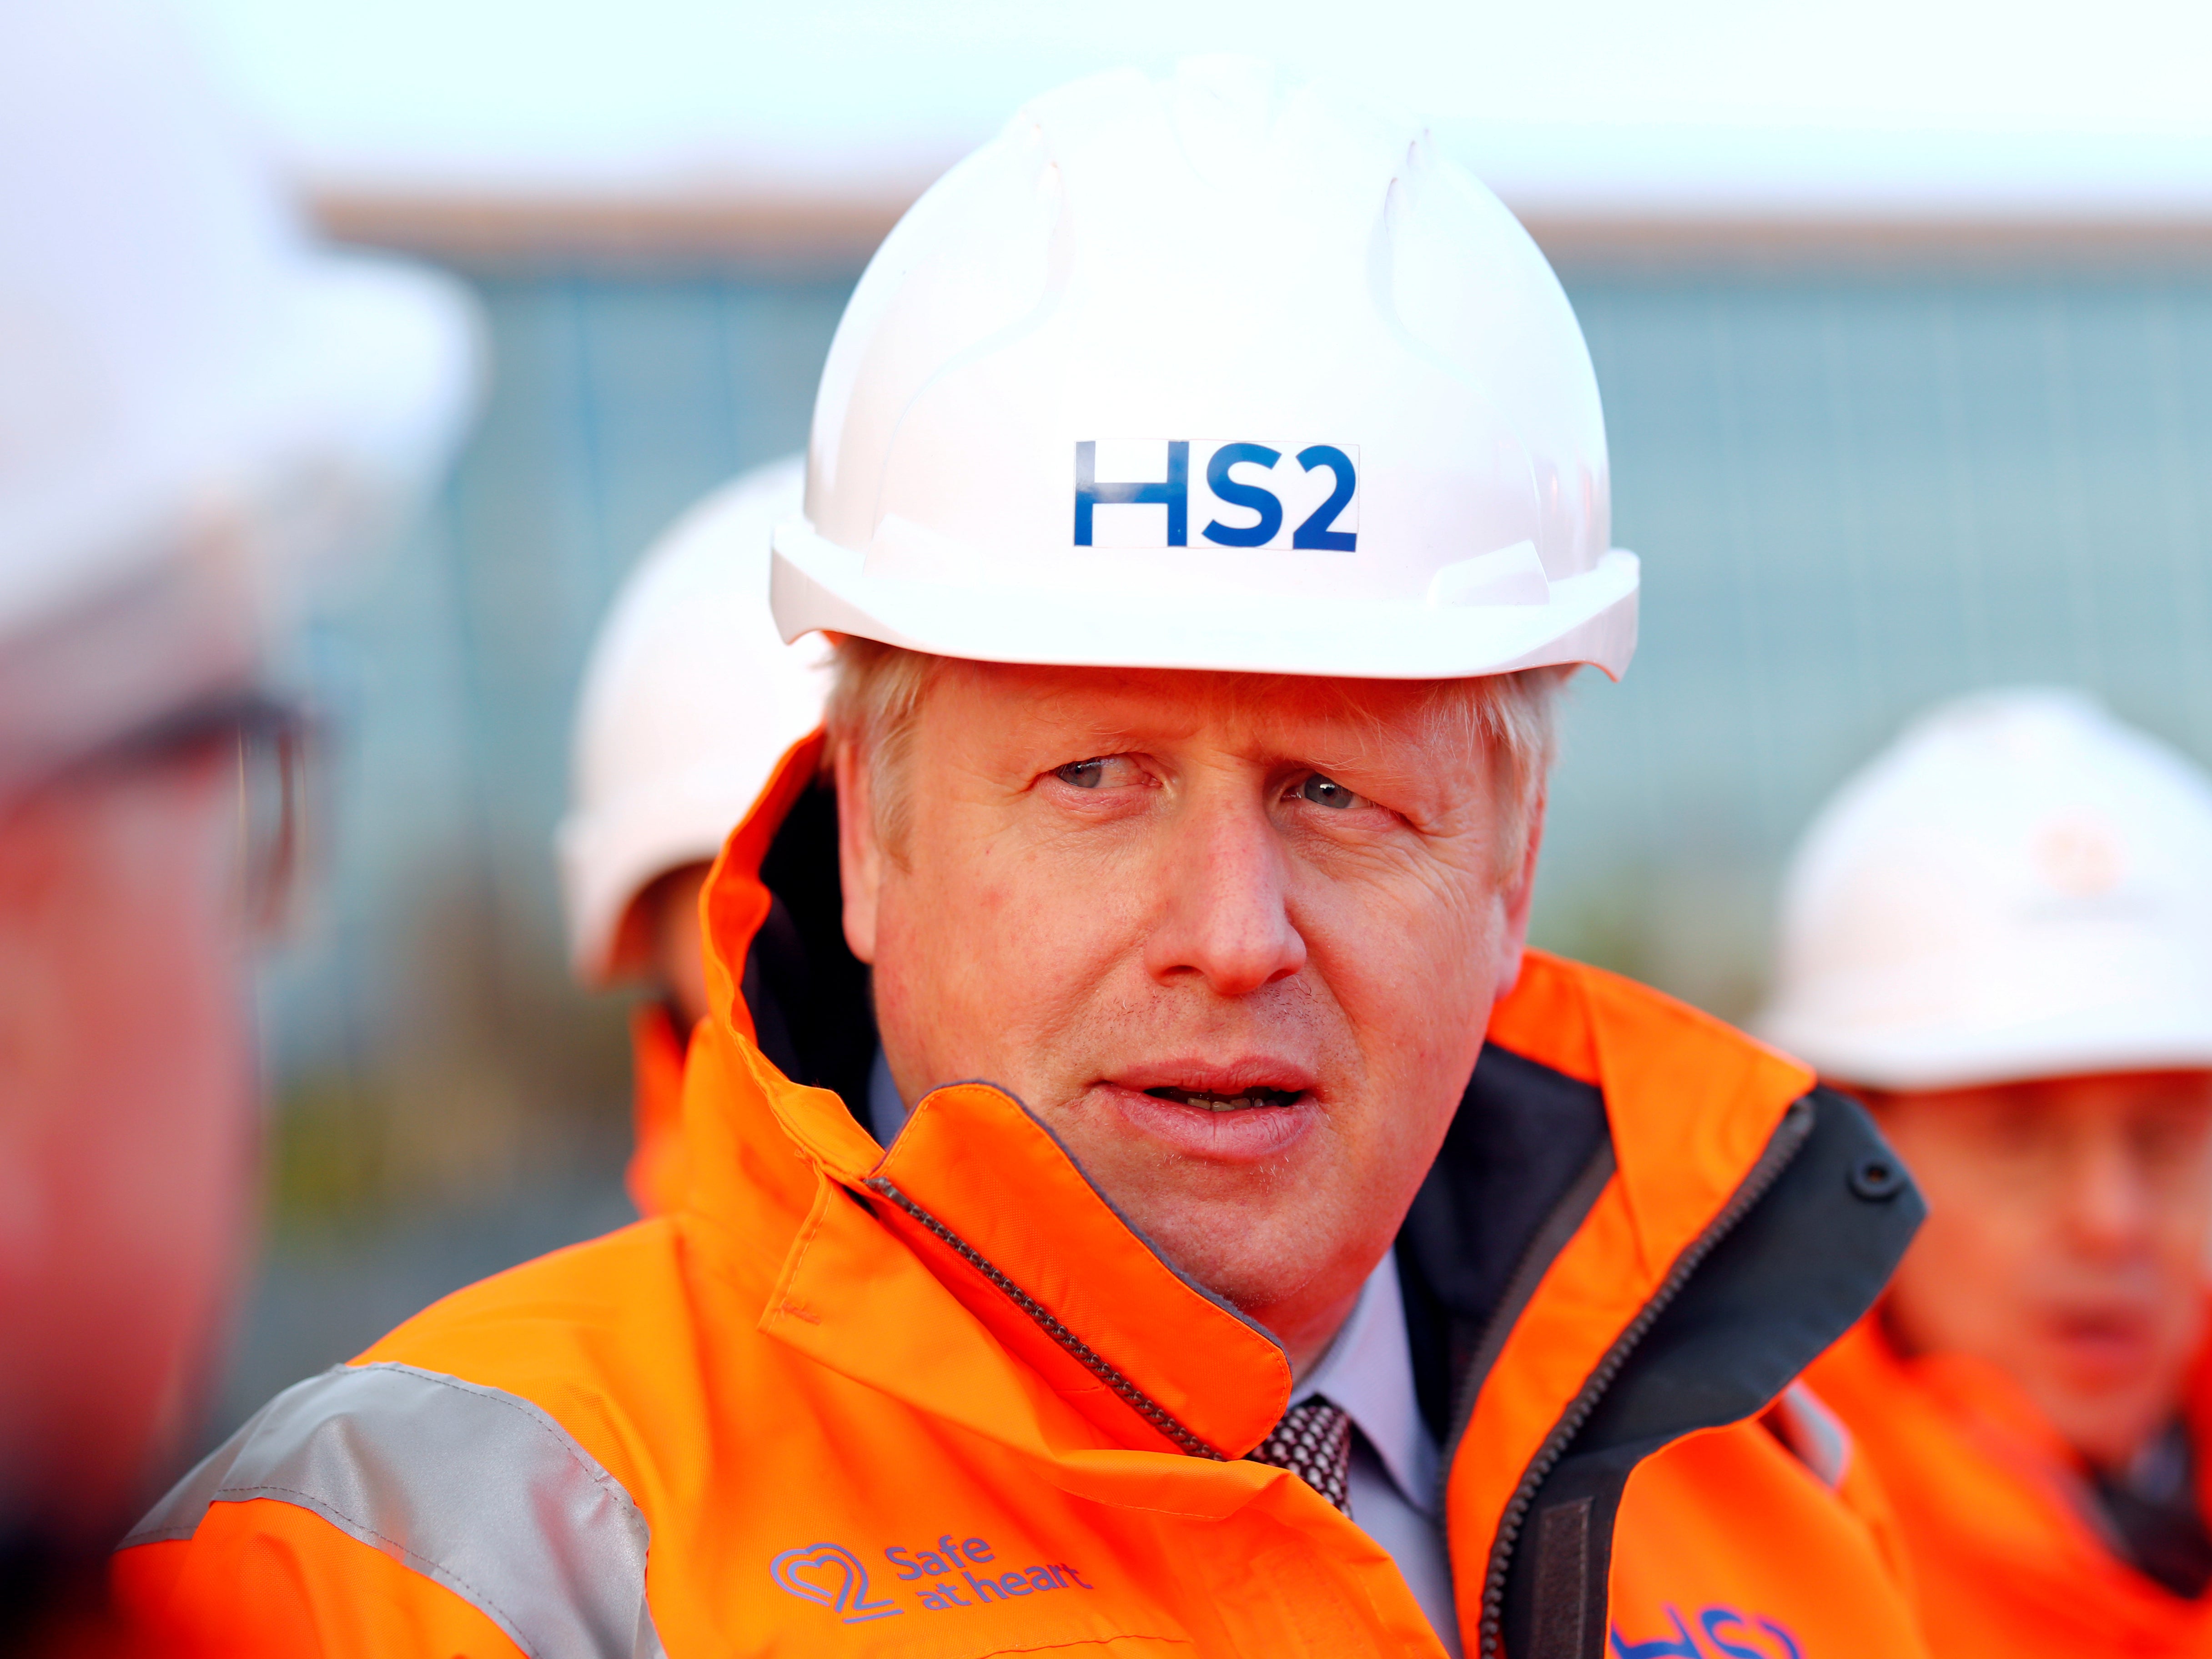 Investments in projects like HS2 are key for long-term growth, but should not be prioritised over investment in people